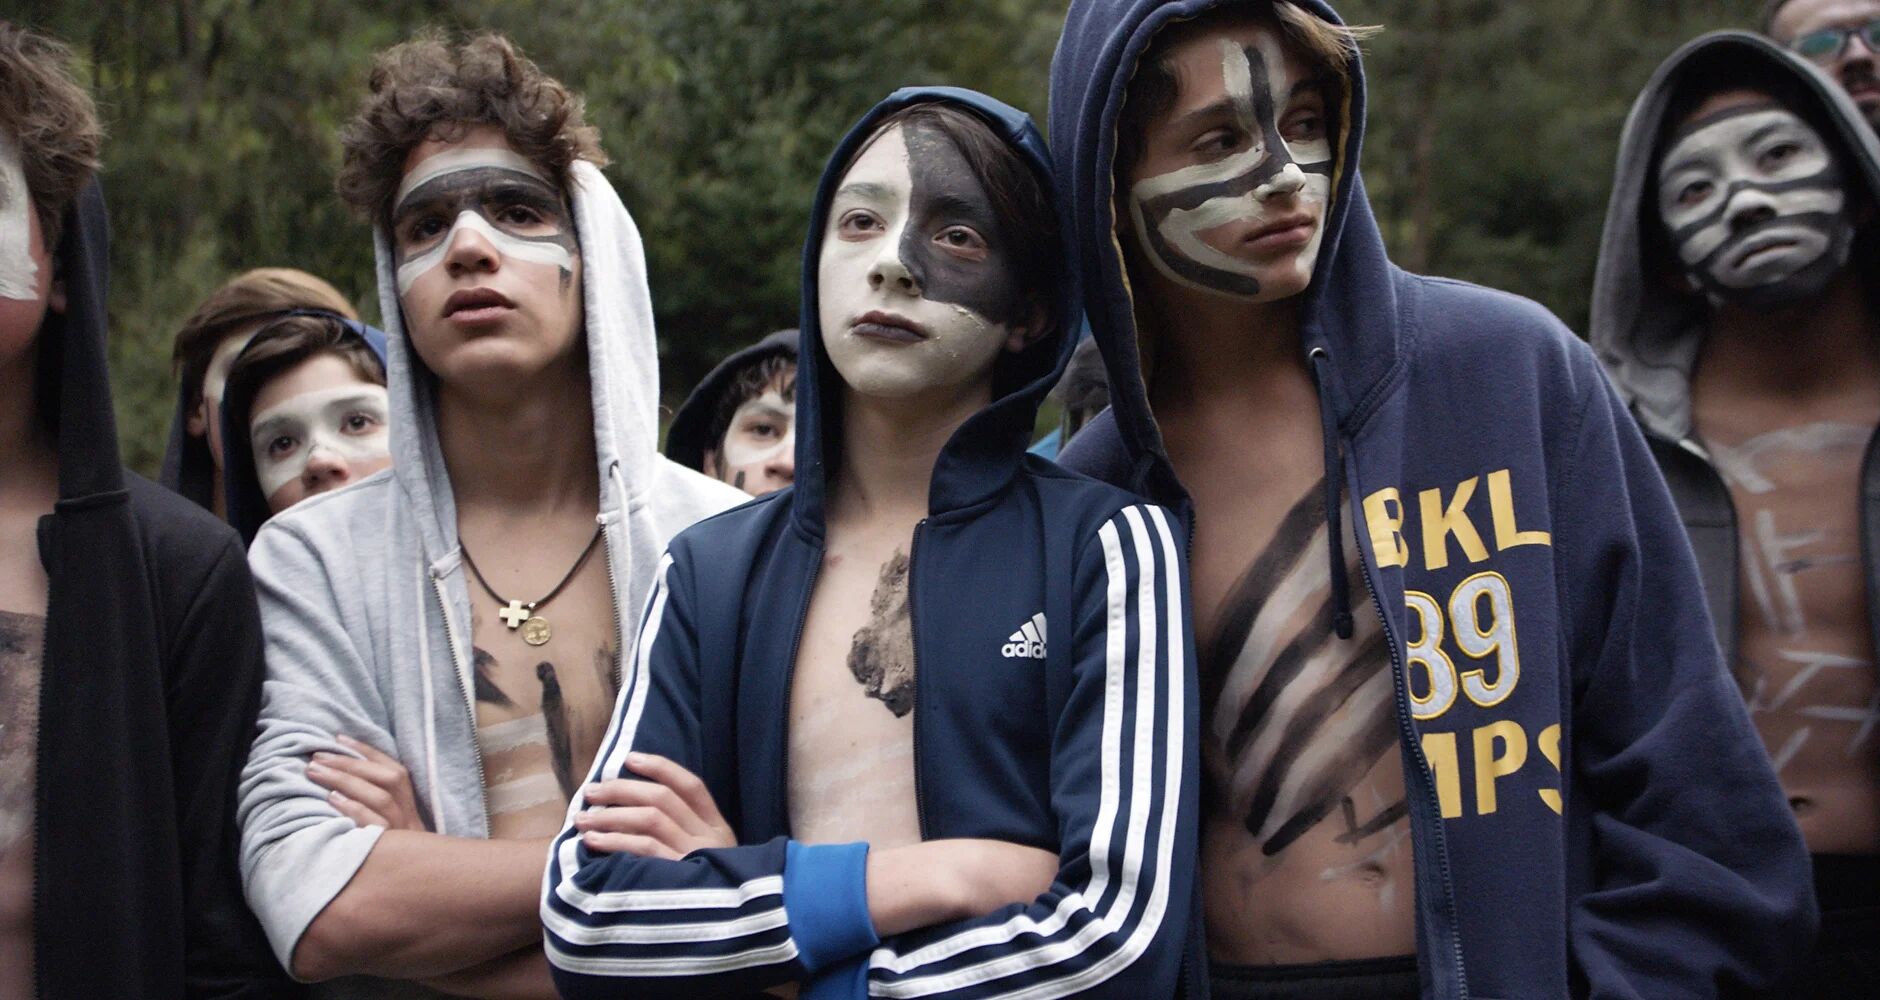 A group of young men wears hoodies and striking black-and-white face paint with trees behind them